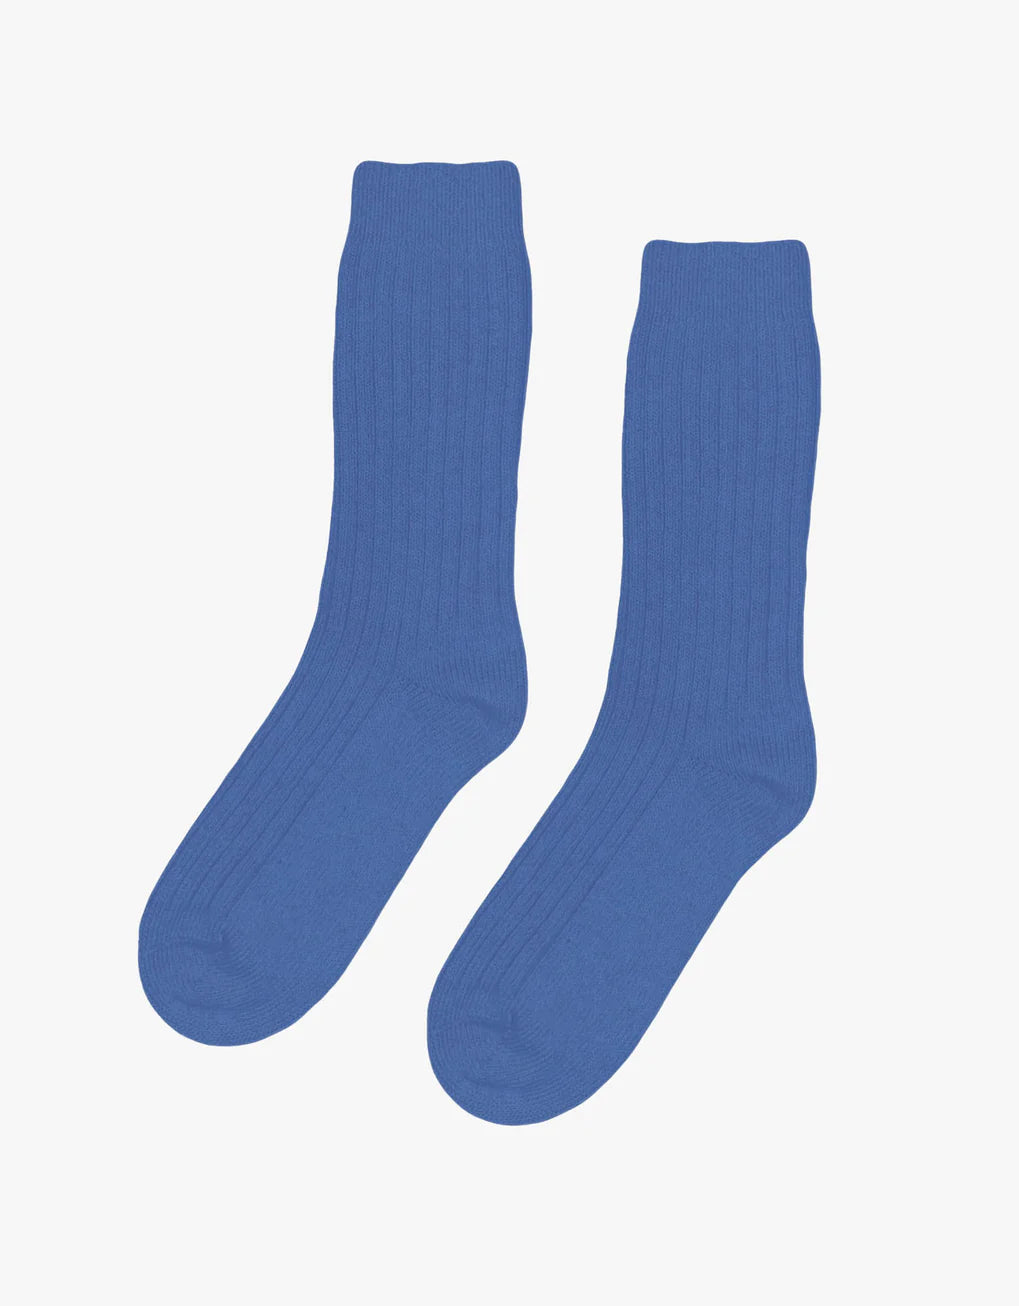 A pair of Colorful Standard Merino Wool Blend Socks made from recycled fibers on a white background.